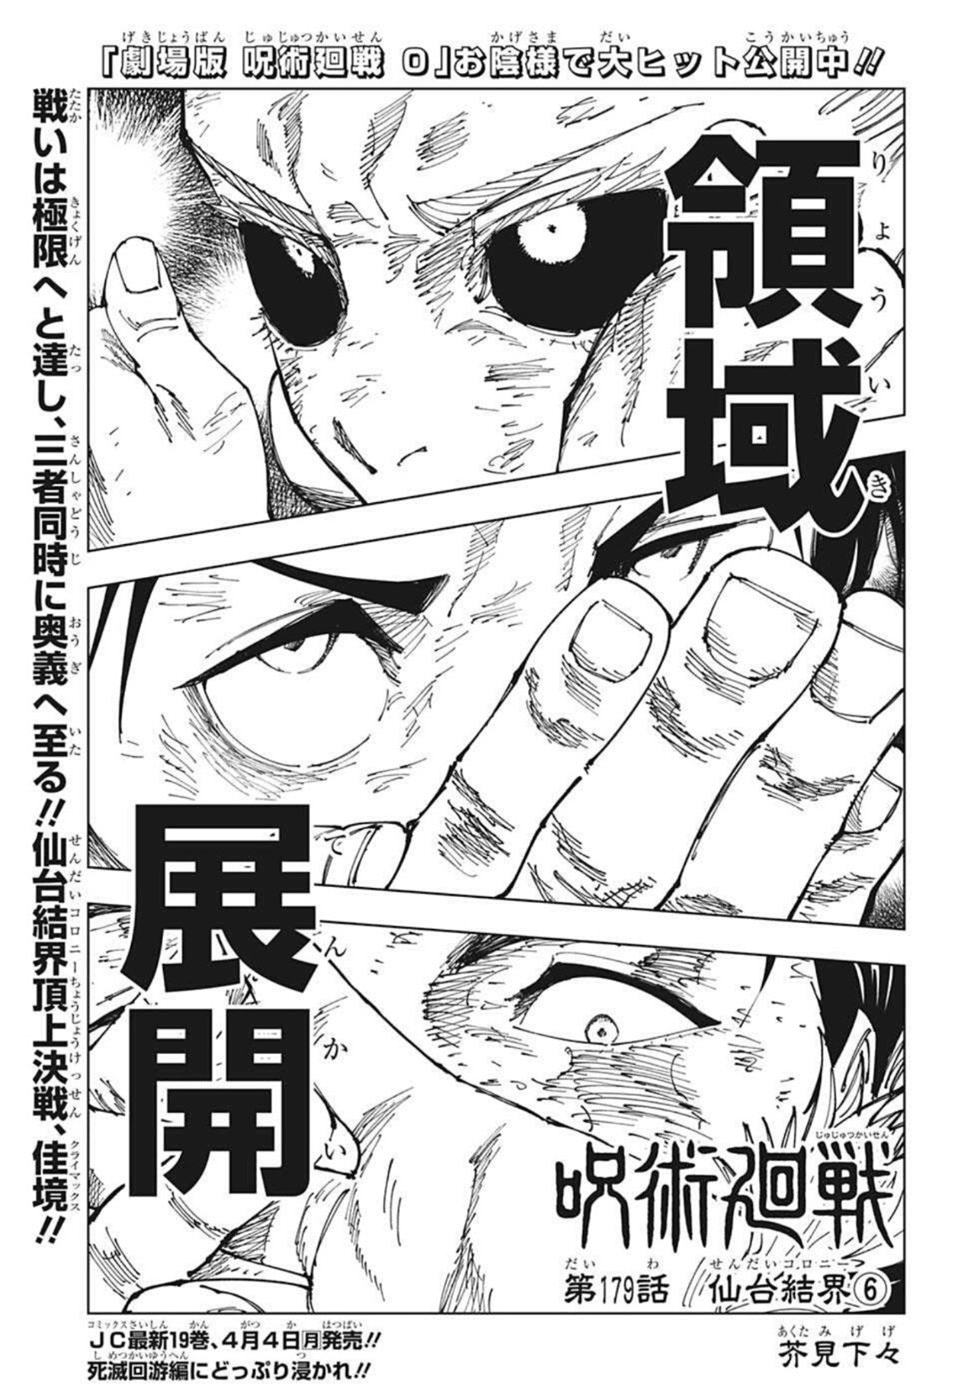 Jujutsu Kaisen Chapter 182 to focus on the new Culling Games